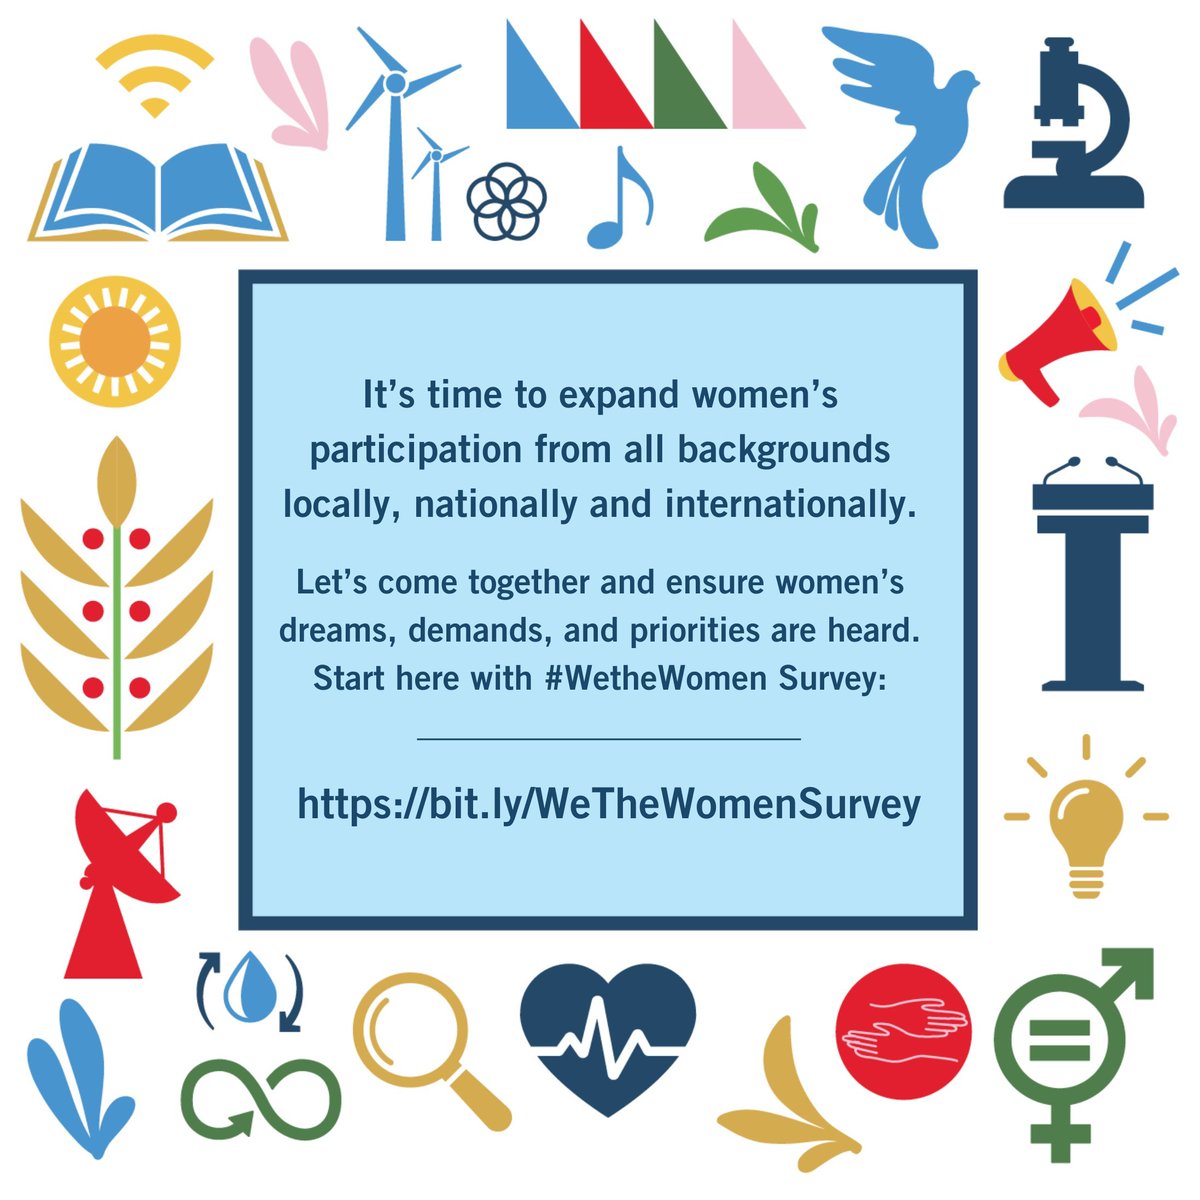 Nothing about women, without women. Let’s ensure women’s perspectives are always included. Global leaders must include the perspectives of women everywhere to address today’s greatest challenges. Share your thoughts in this #WetheWomen survey: bit.ly/WeTheWomenSurv…